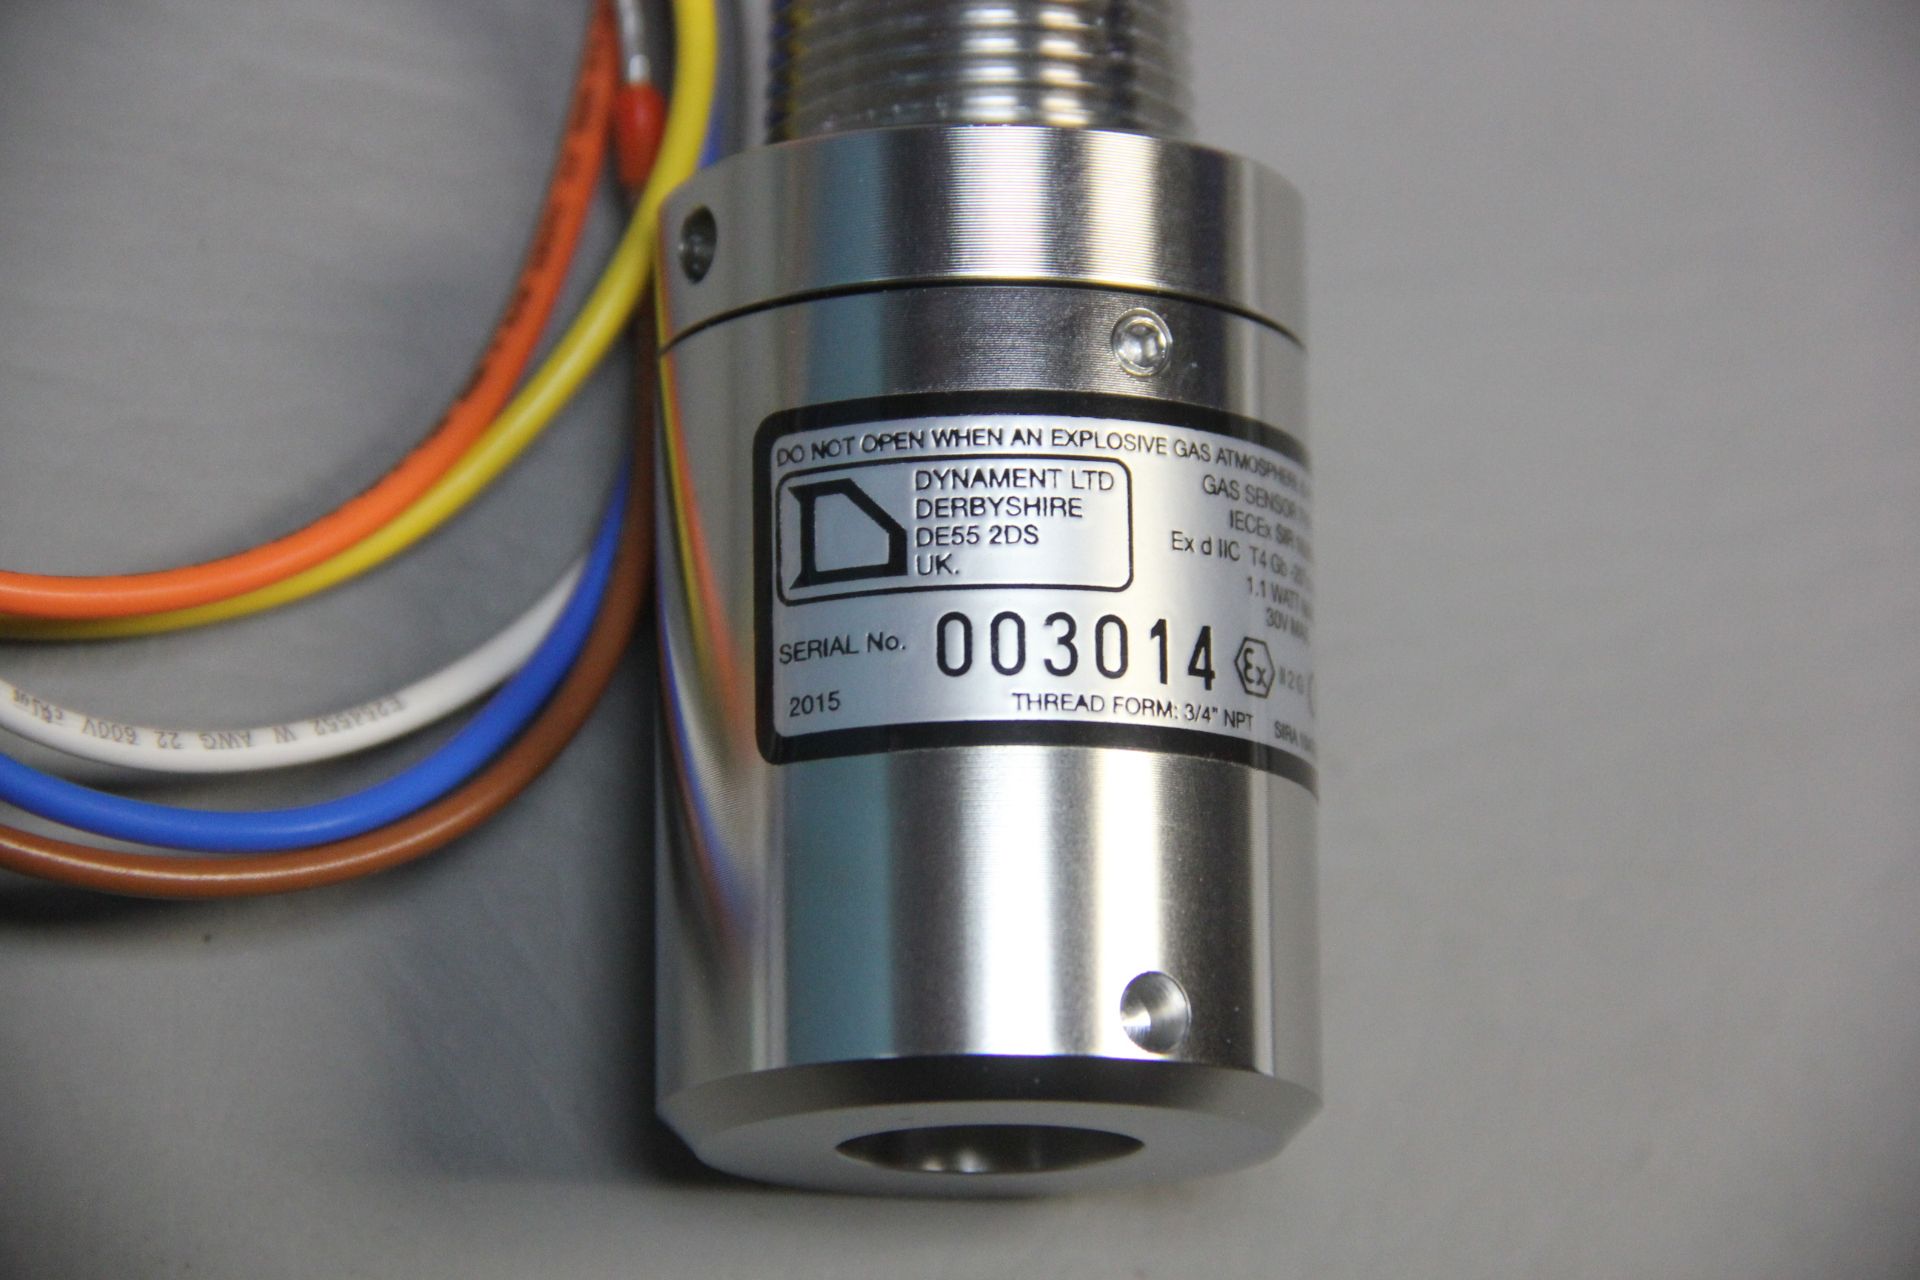 DYNAMENT FLAMEPROOF INFRARED GAS SENSOR - Image 10 of 15